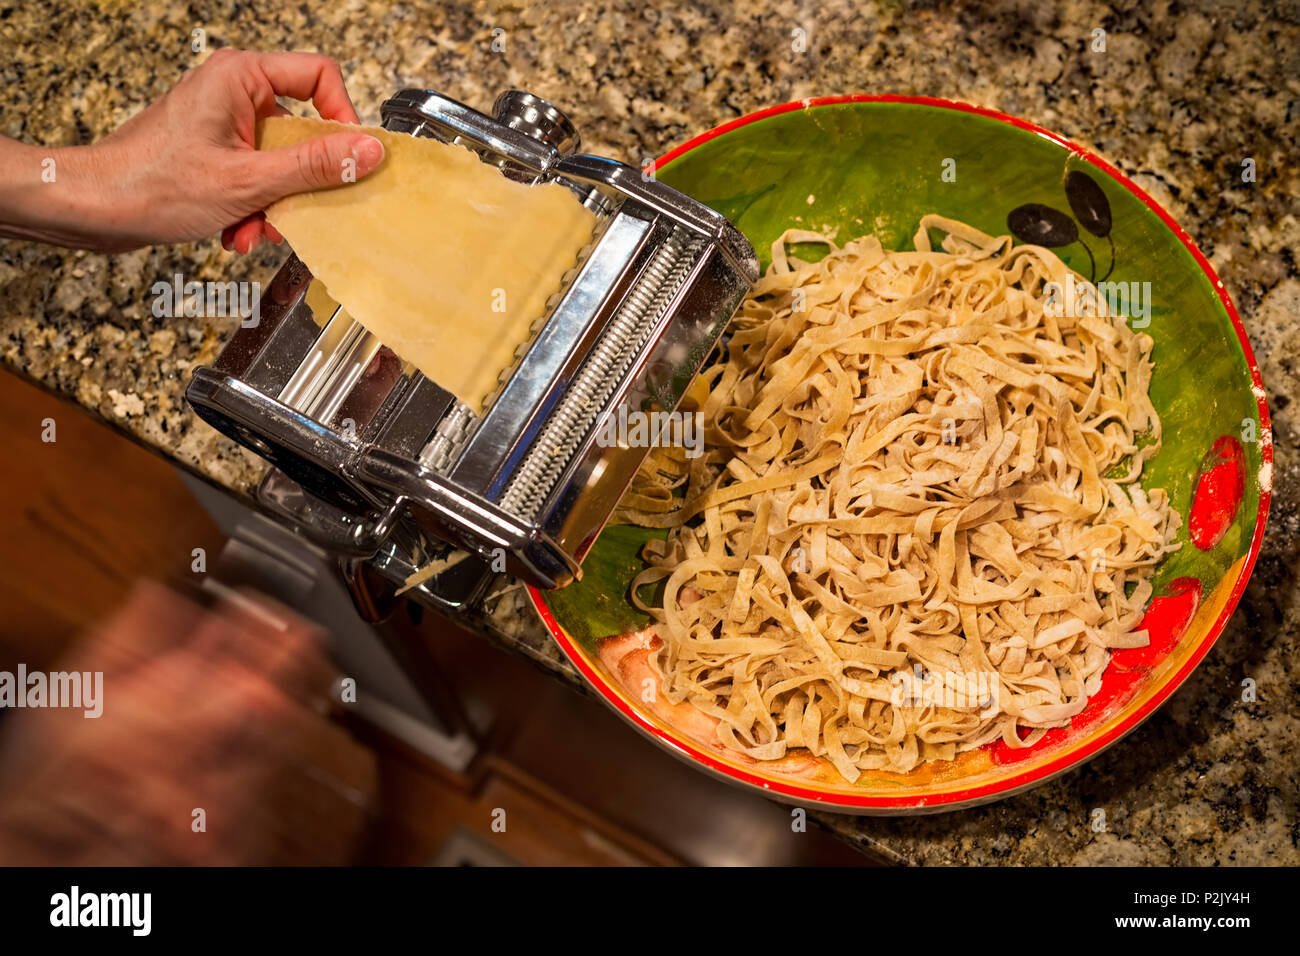 Home Made Rigatoni Pasta By Pasta Maker Stock Photo, Picture and Royalty  Free Image. Image 133166681.